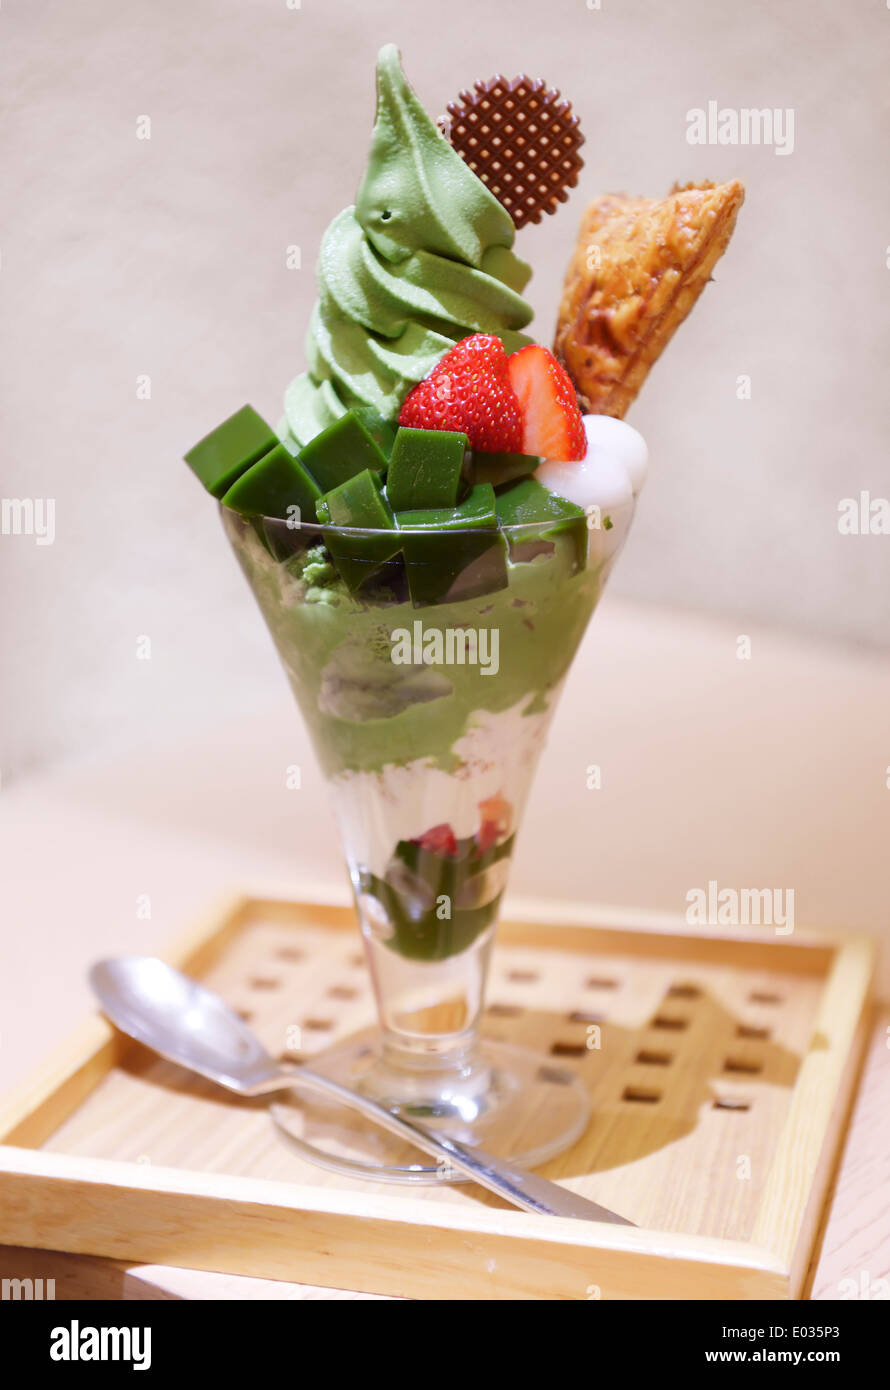 Matcha parfait, green tea icecream and fruit dessert in a glass in Japanese cafe Stock Photo